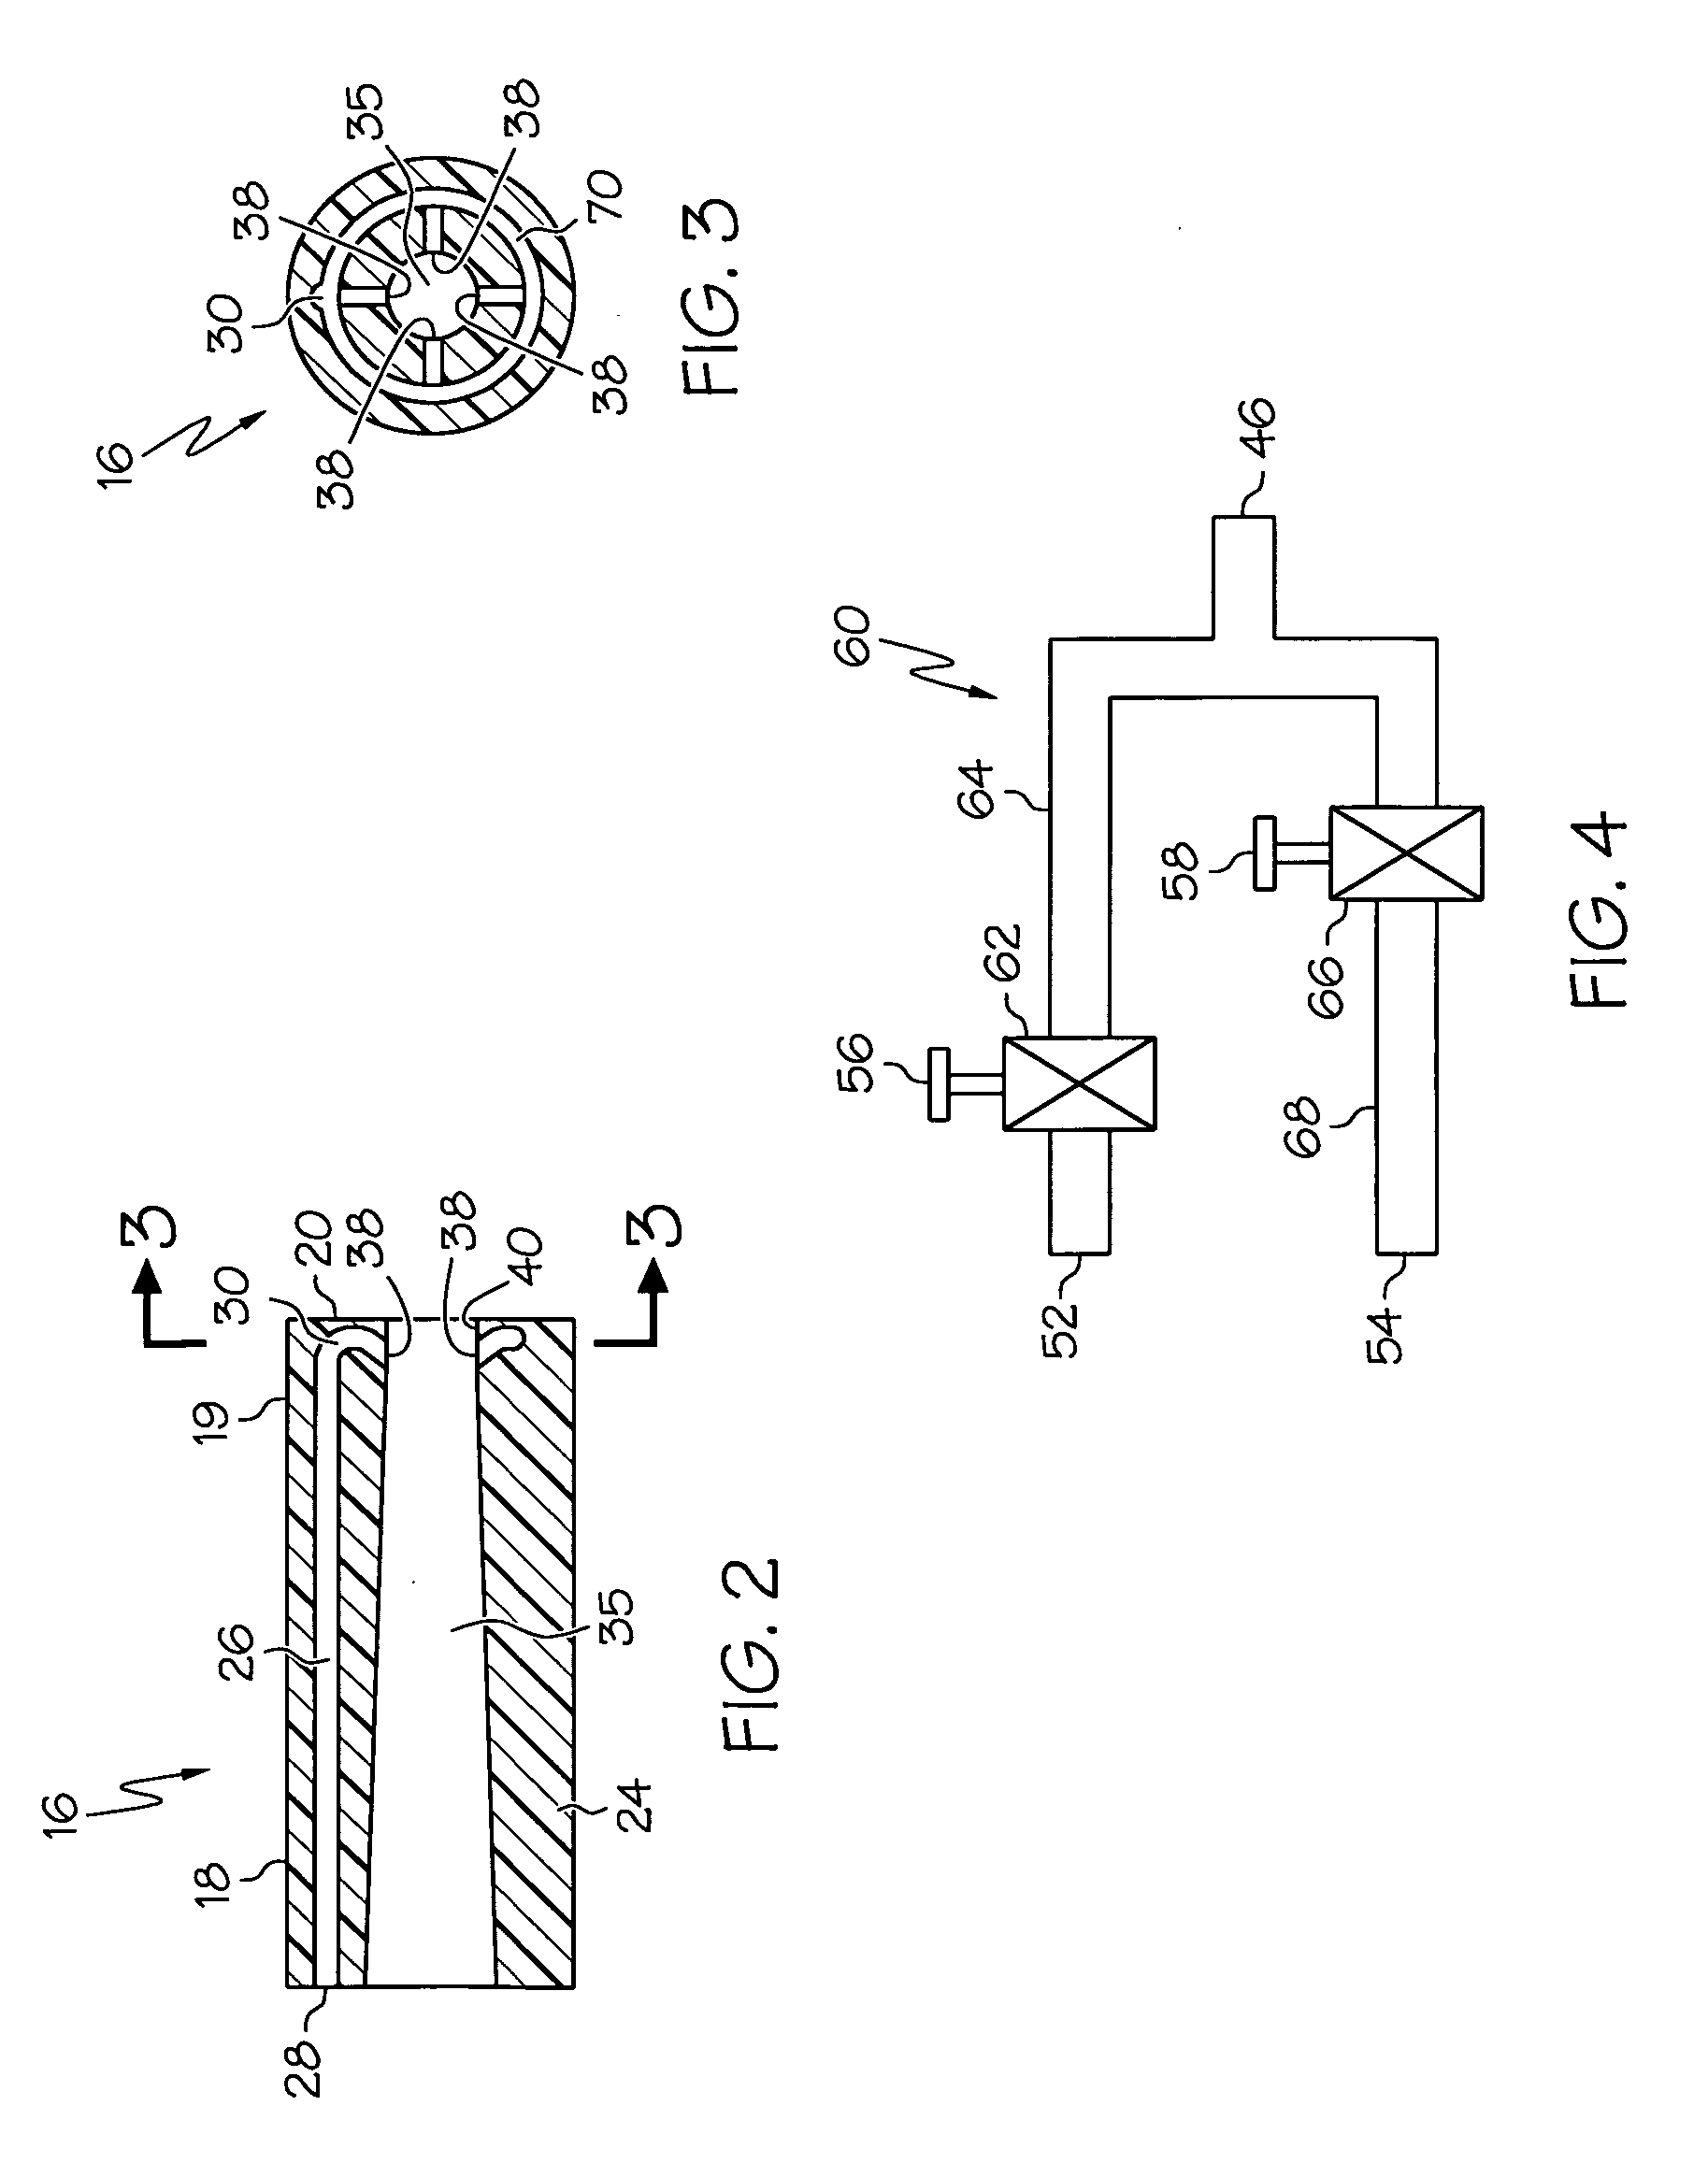 Apparatus for cleaning a distal scope end of a medical viewing scope